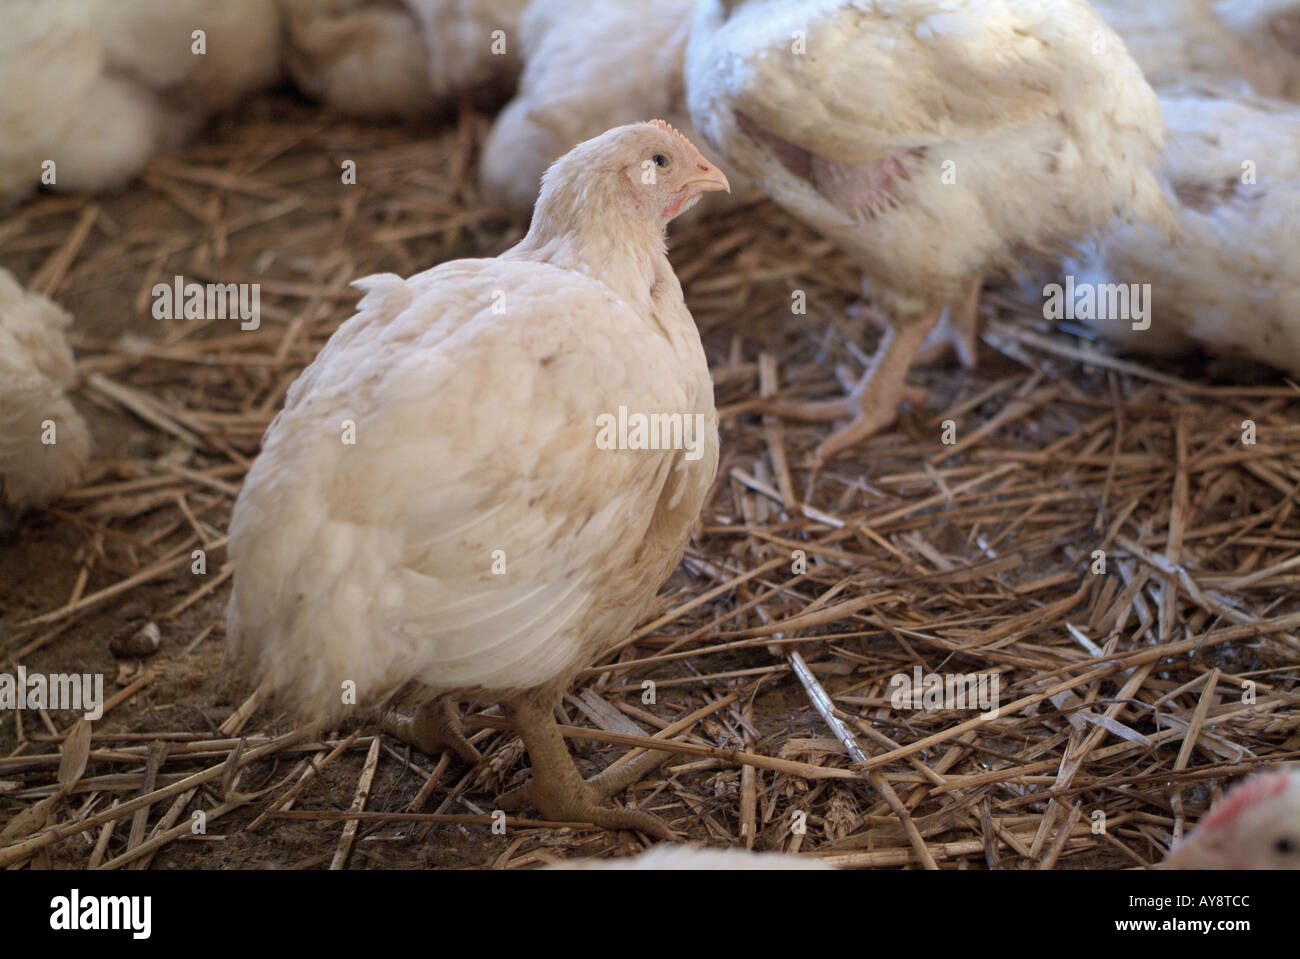 American Cobb Chicken on a Commercial Poultry Farm Stock Photo